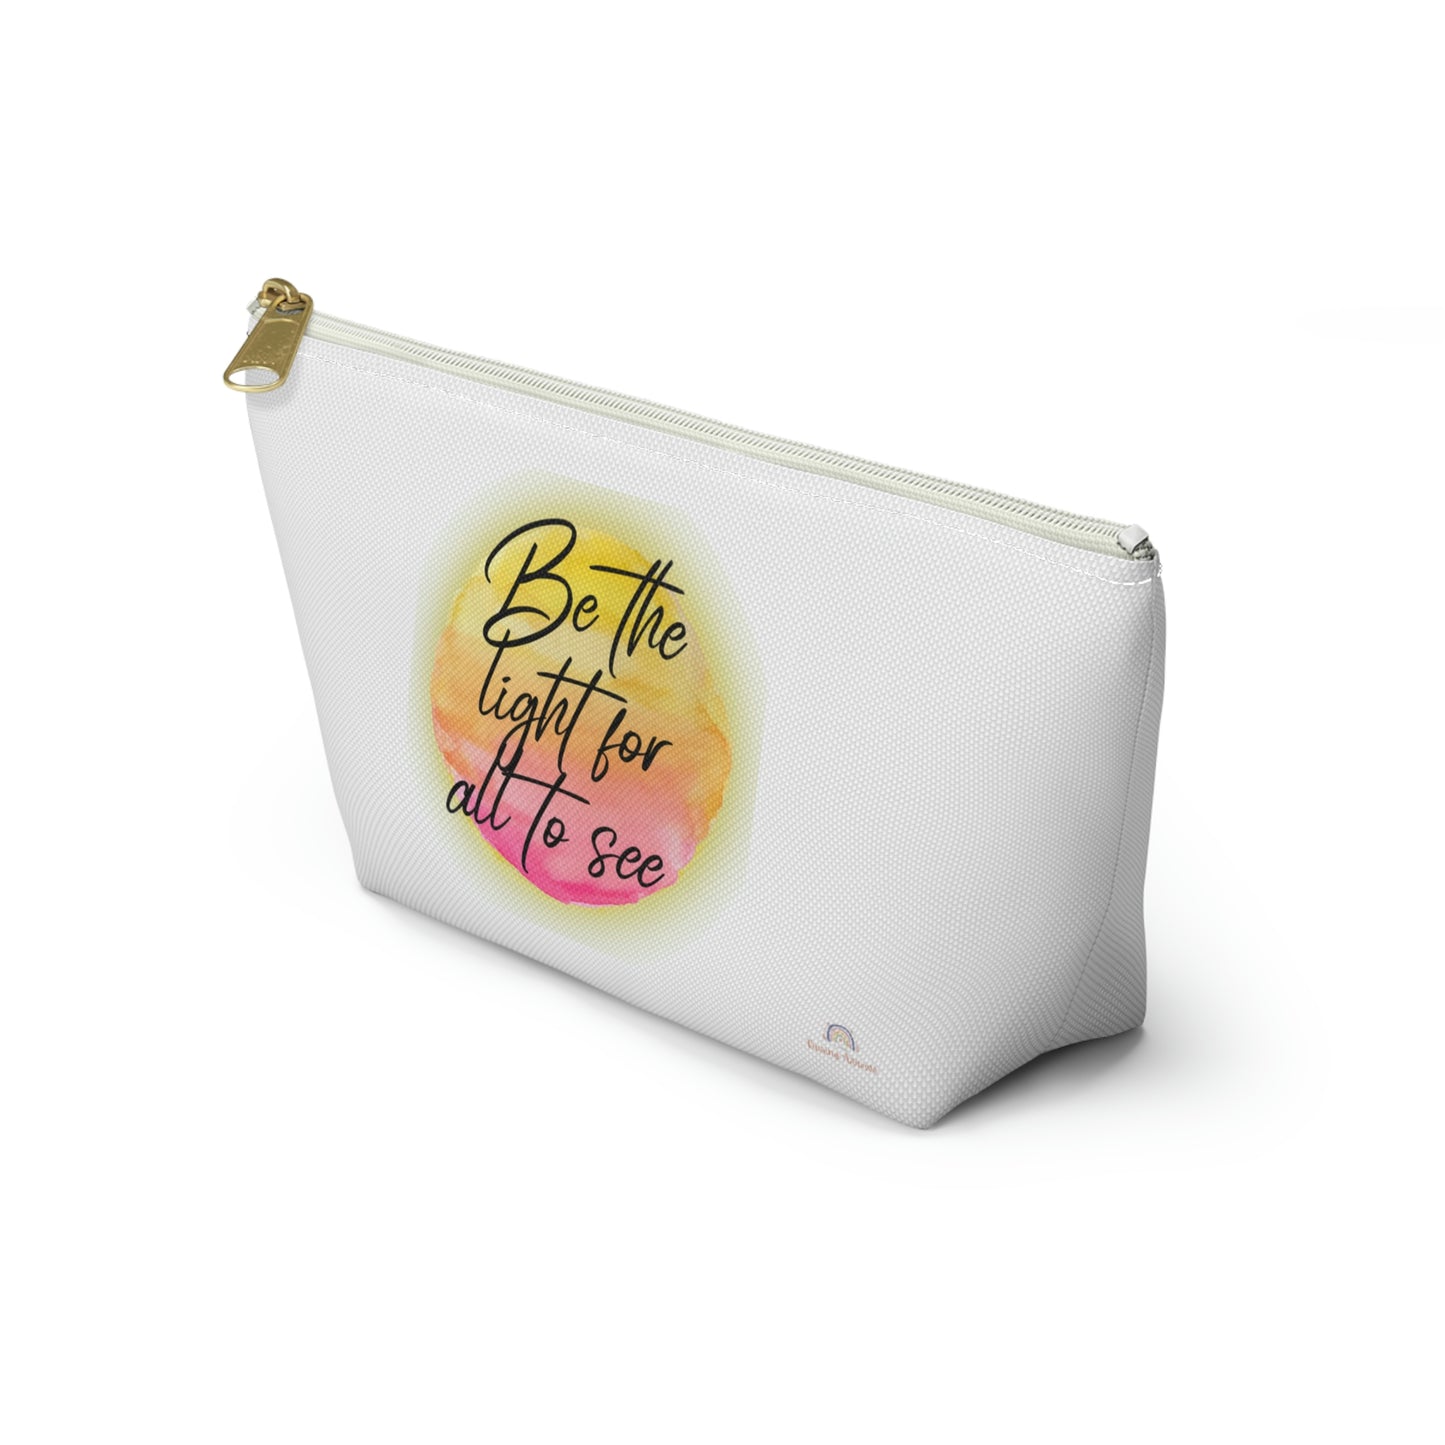 Be the light for all to see bag